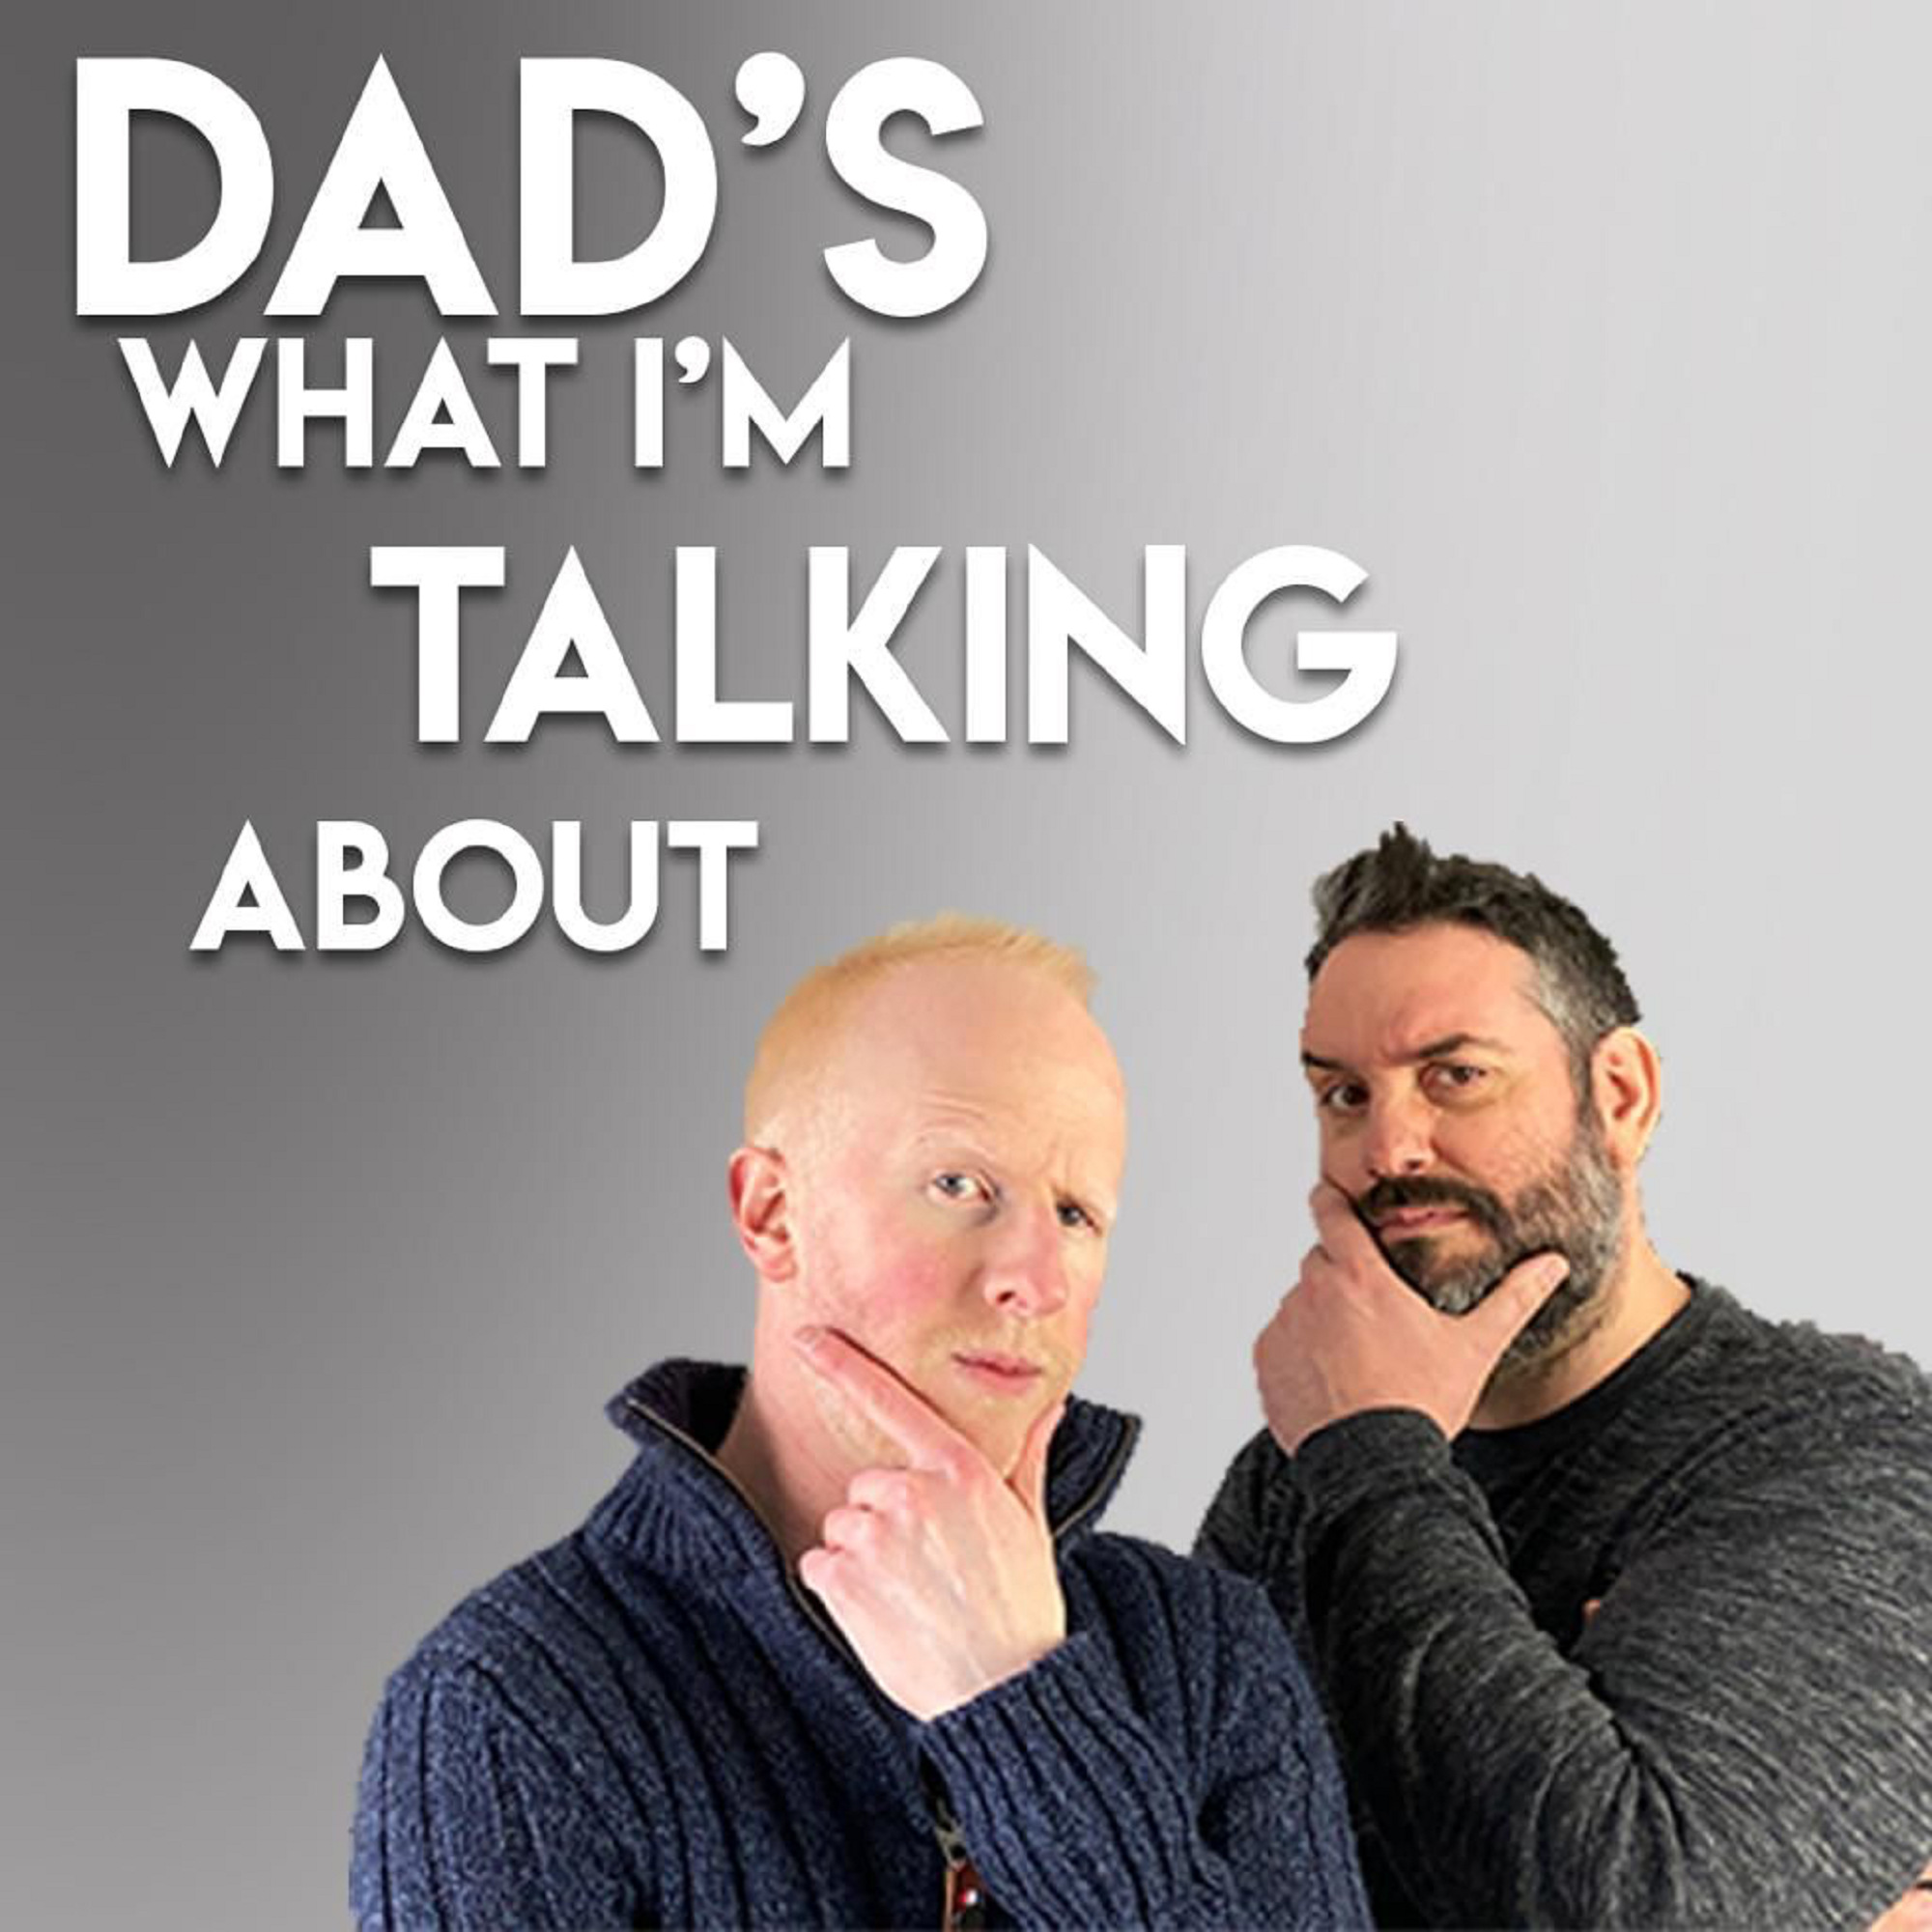 Artwork for podcast Guild of Dads: Vision+Action=Meaning